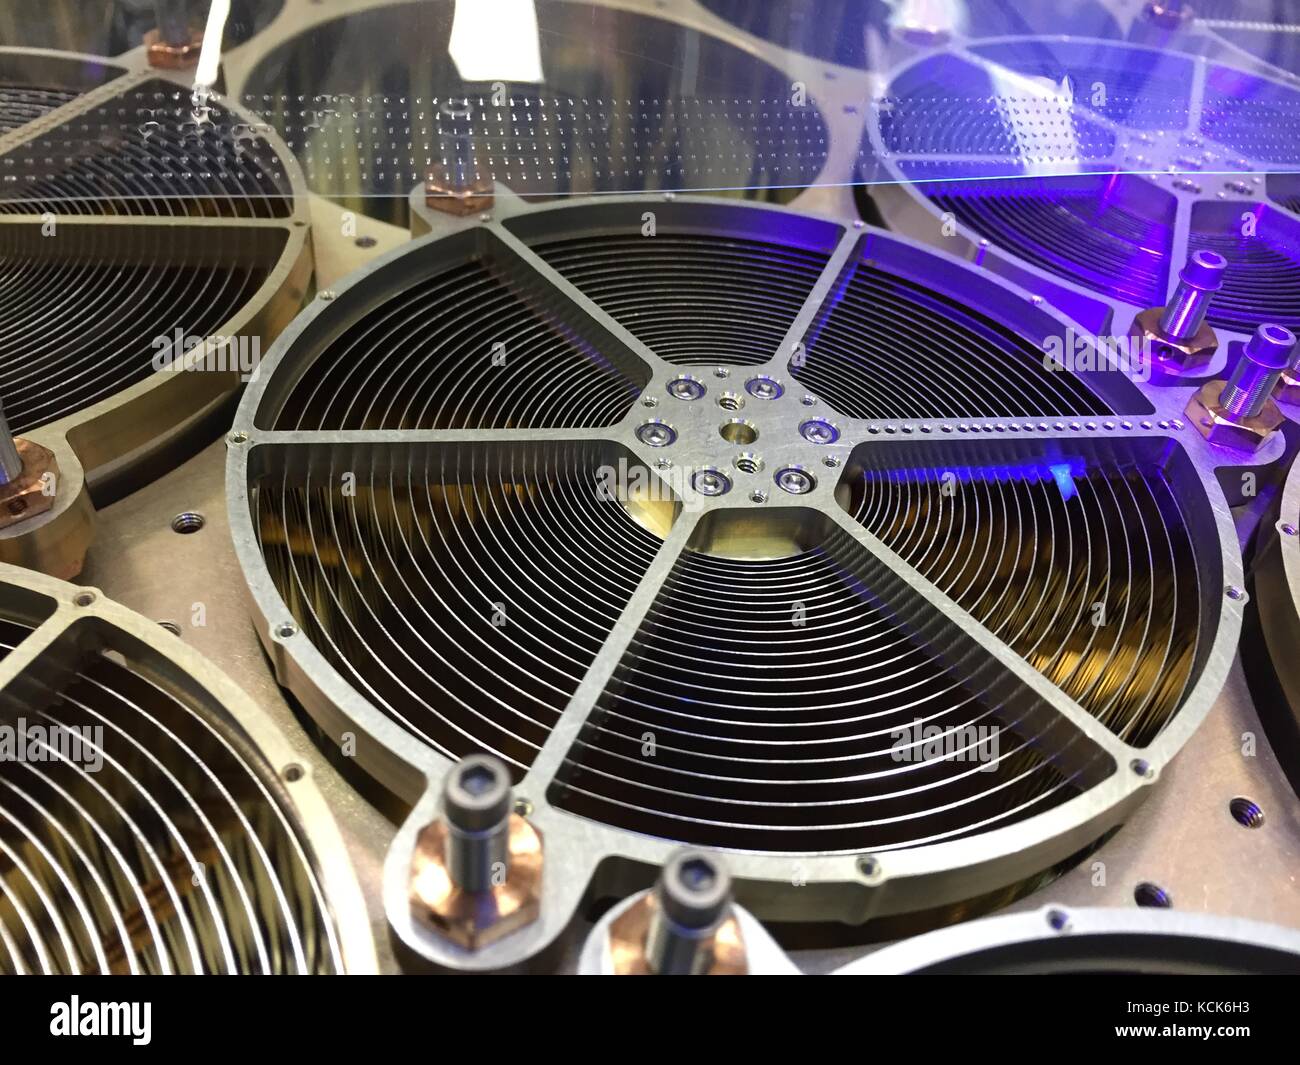 The NASA Neutron Star Interior Composition Explorer (NICER) x-ray concentrator optics are inspected under a black light for dust or foreign objects that could impair functionality once in space at the Goddard Space Flight Center July 6, 2015 in Greenbelt, Maryland. NICER will launch aboard the SpaceX CRS-11 commercial resupply spacecraft and will be the first mission to study neutron stars.  (photo by Keith Gendreau  via Planetpix) Stock Photo